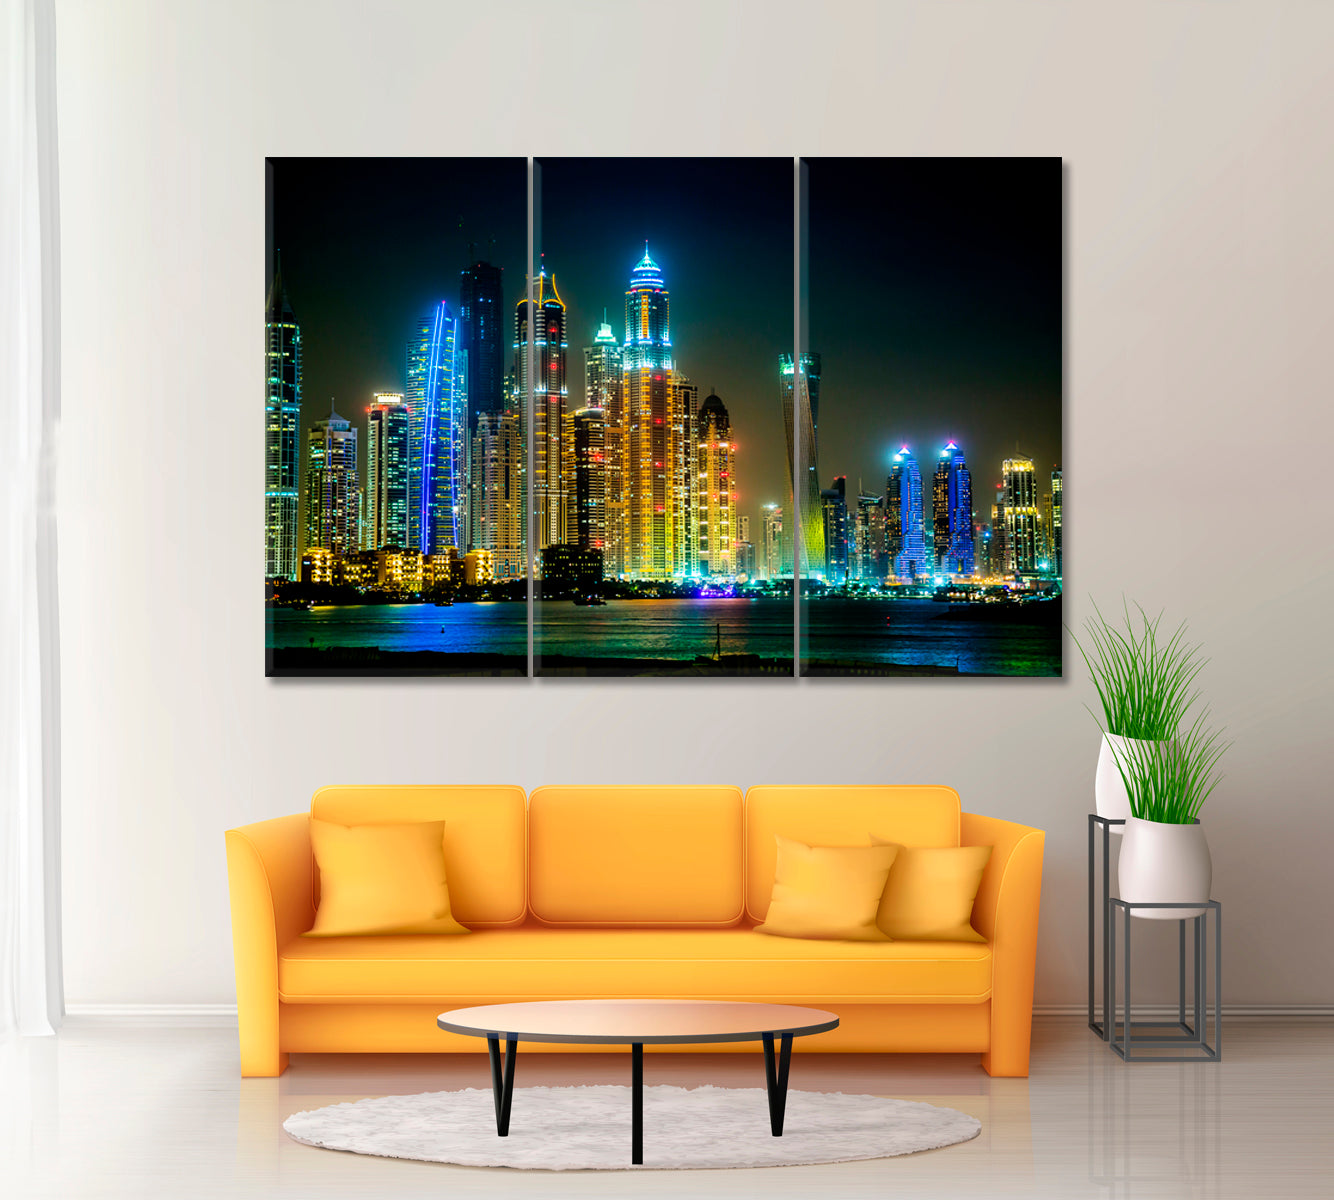 Dubai Downtown with City Lights at Night Canvas Print ArtLexy 3 Panels 36"x24" inches 